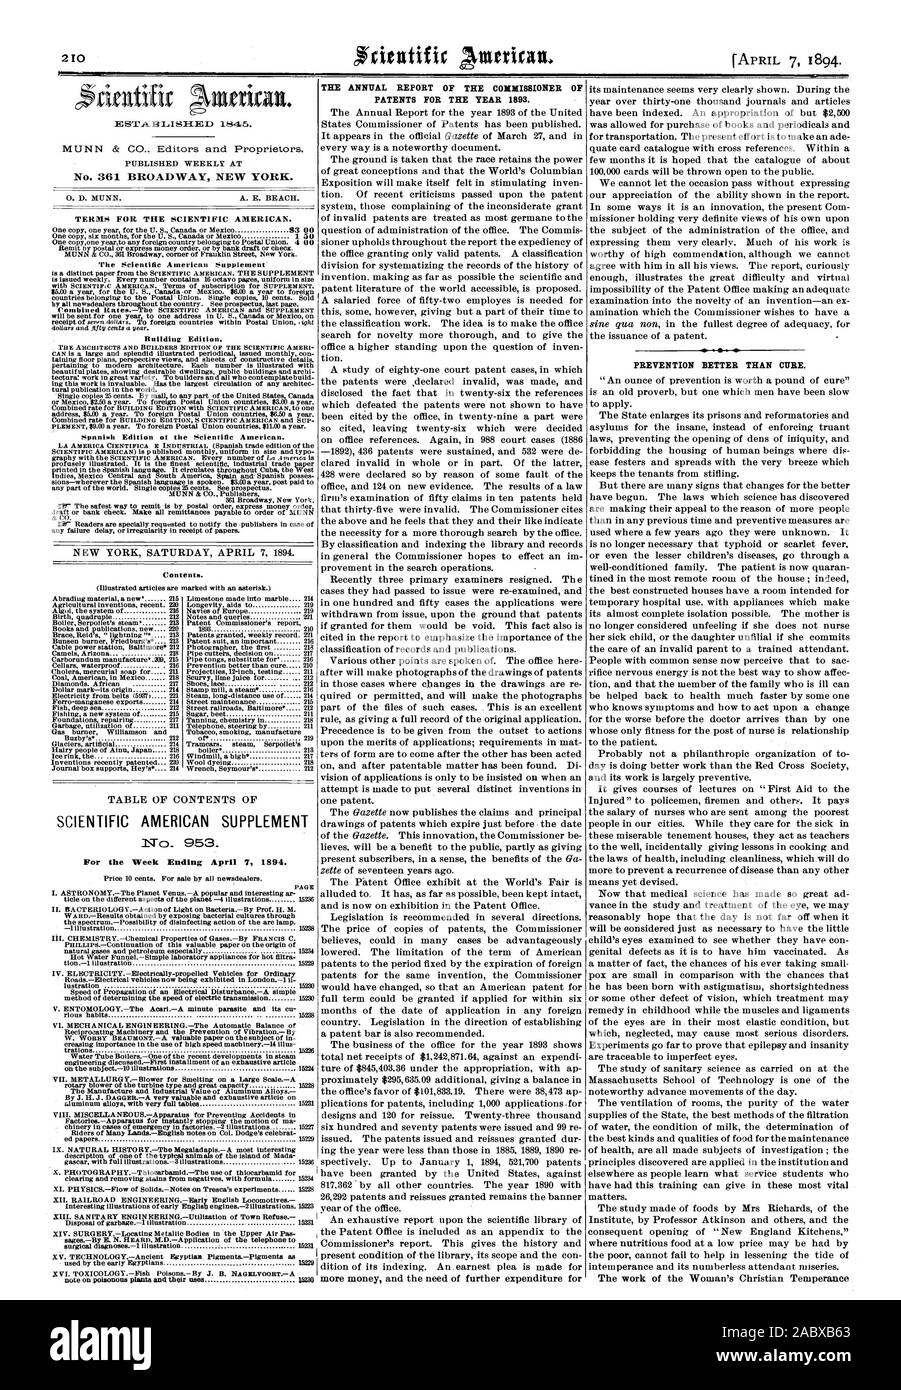 SCIENTIFIC AMERICAN SUPPLEMENT To 953. For the Week Ending April '7 1894. THE ANNUAL REPORT OF THE COMMISSIONER OF PATENTS FOR THE YEAR 1893. PREVENTION BETTER THAN CURE., 1894-04-07 Stock Photo